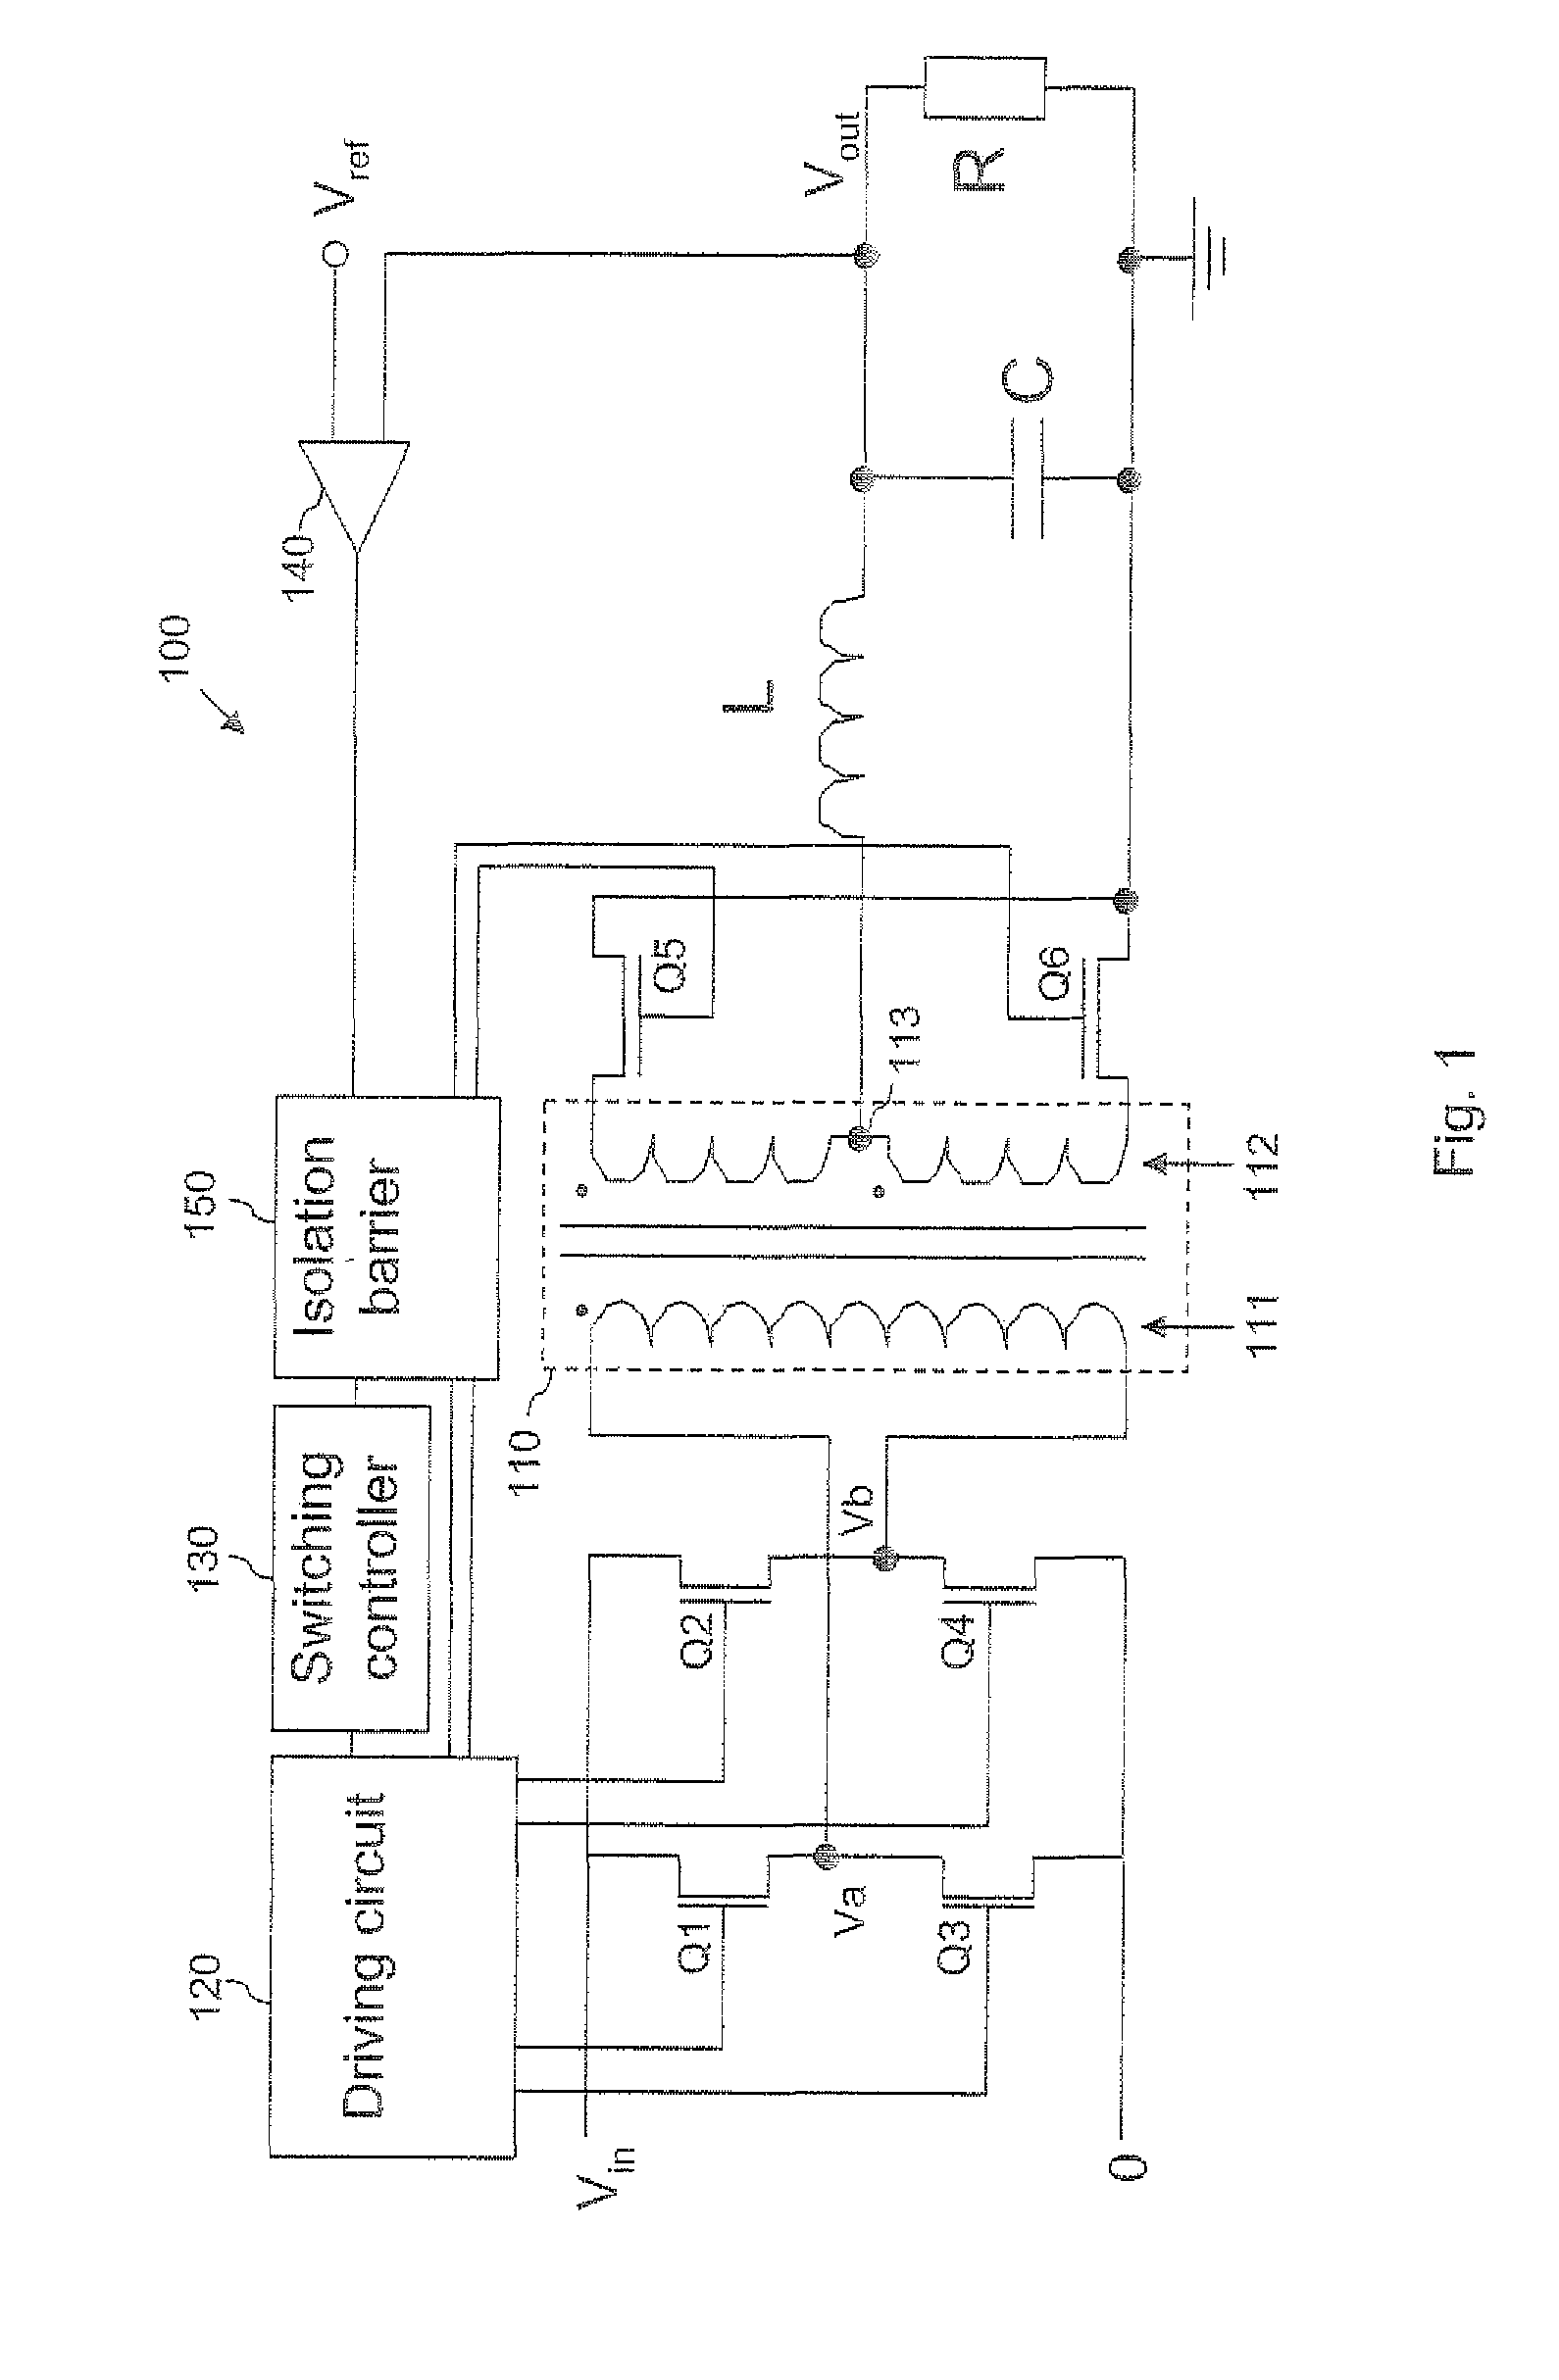 Start-up procedure for an isolated switched mode power supply